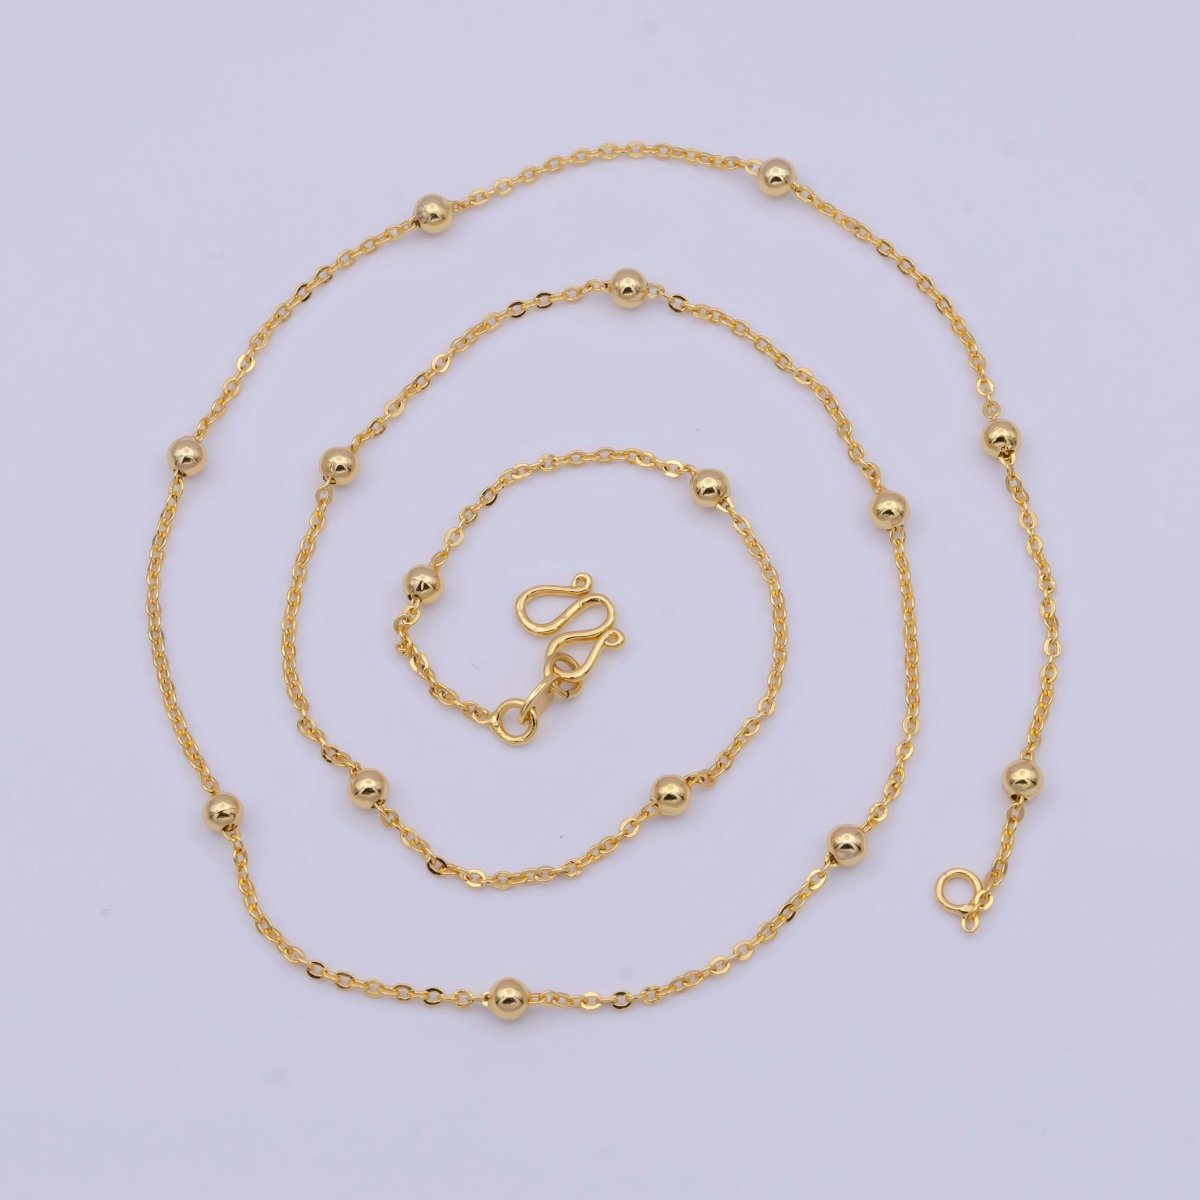 Beaded Chain Gold Satellite Necklace, Dainty Beaded Necklace, Layering Beaded Chain, Delicate Necklace Ready to Wear with W Clasp | WA-1131 Clearance Pricing - DLUXCA